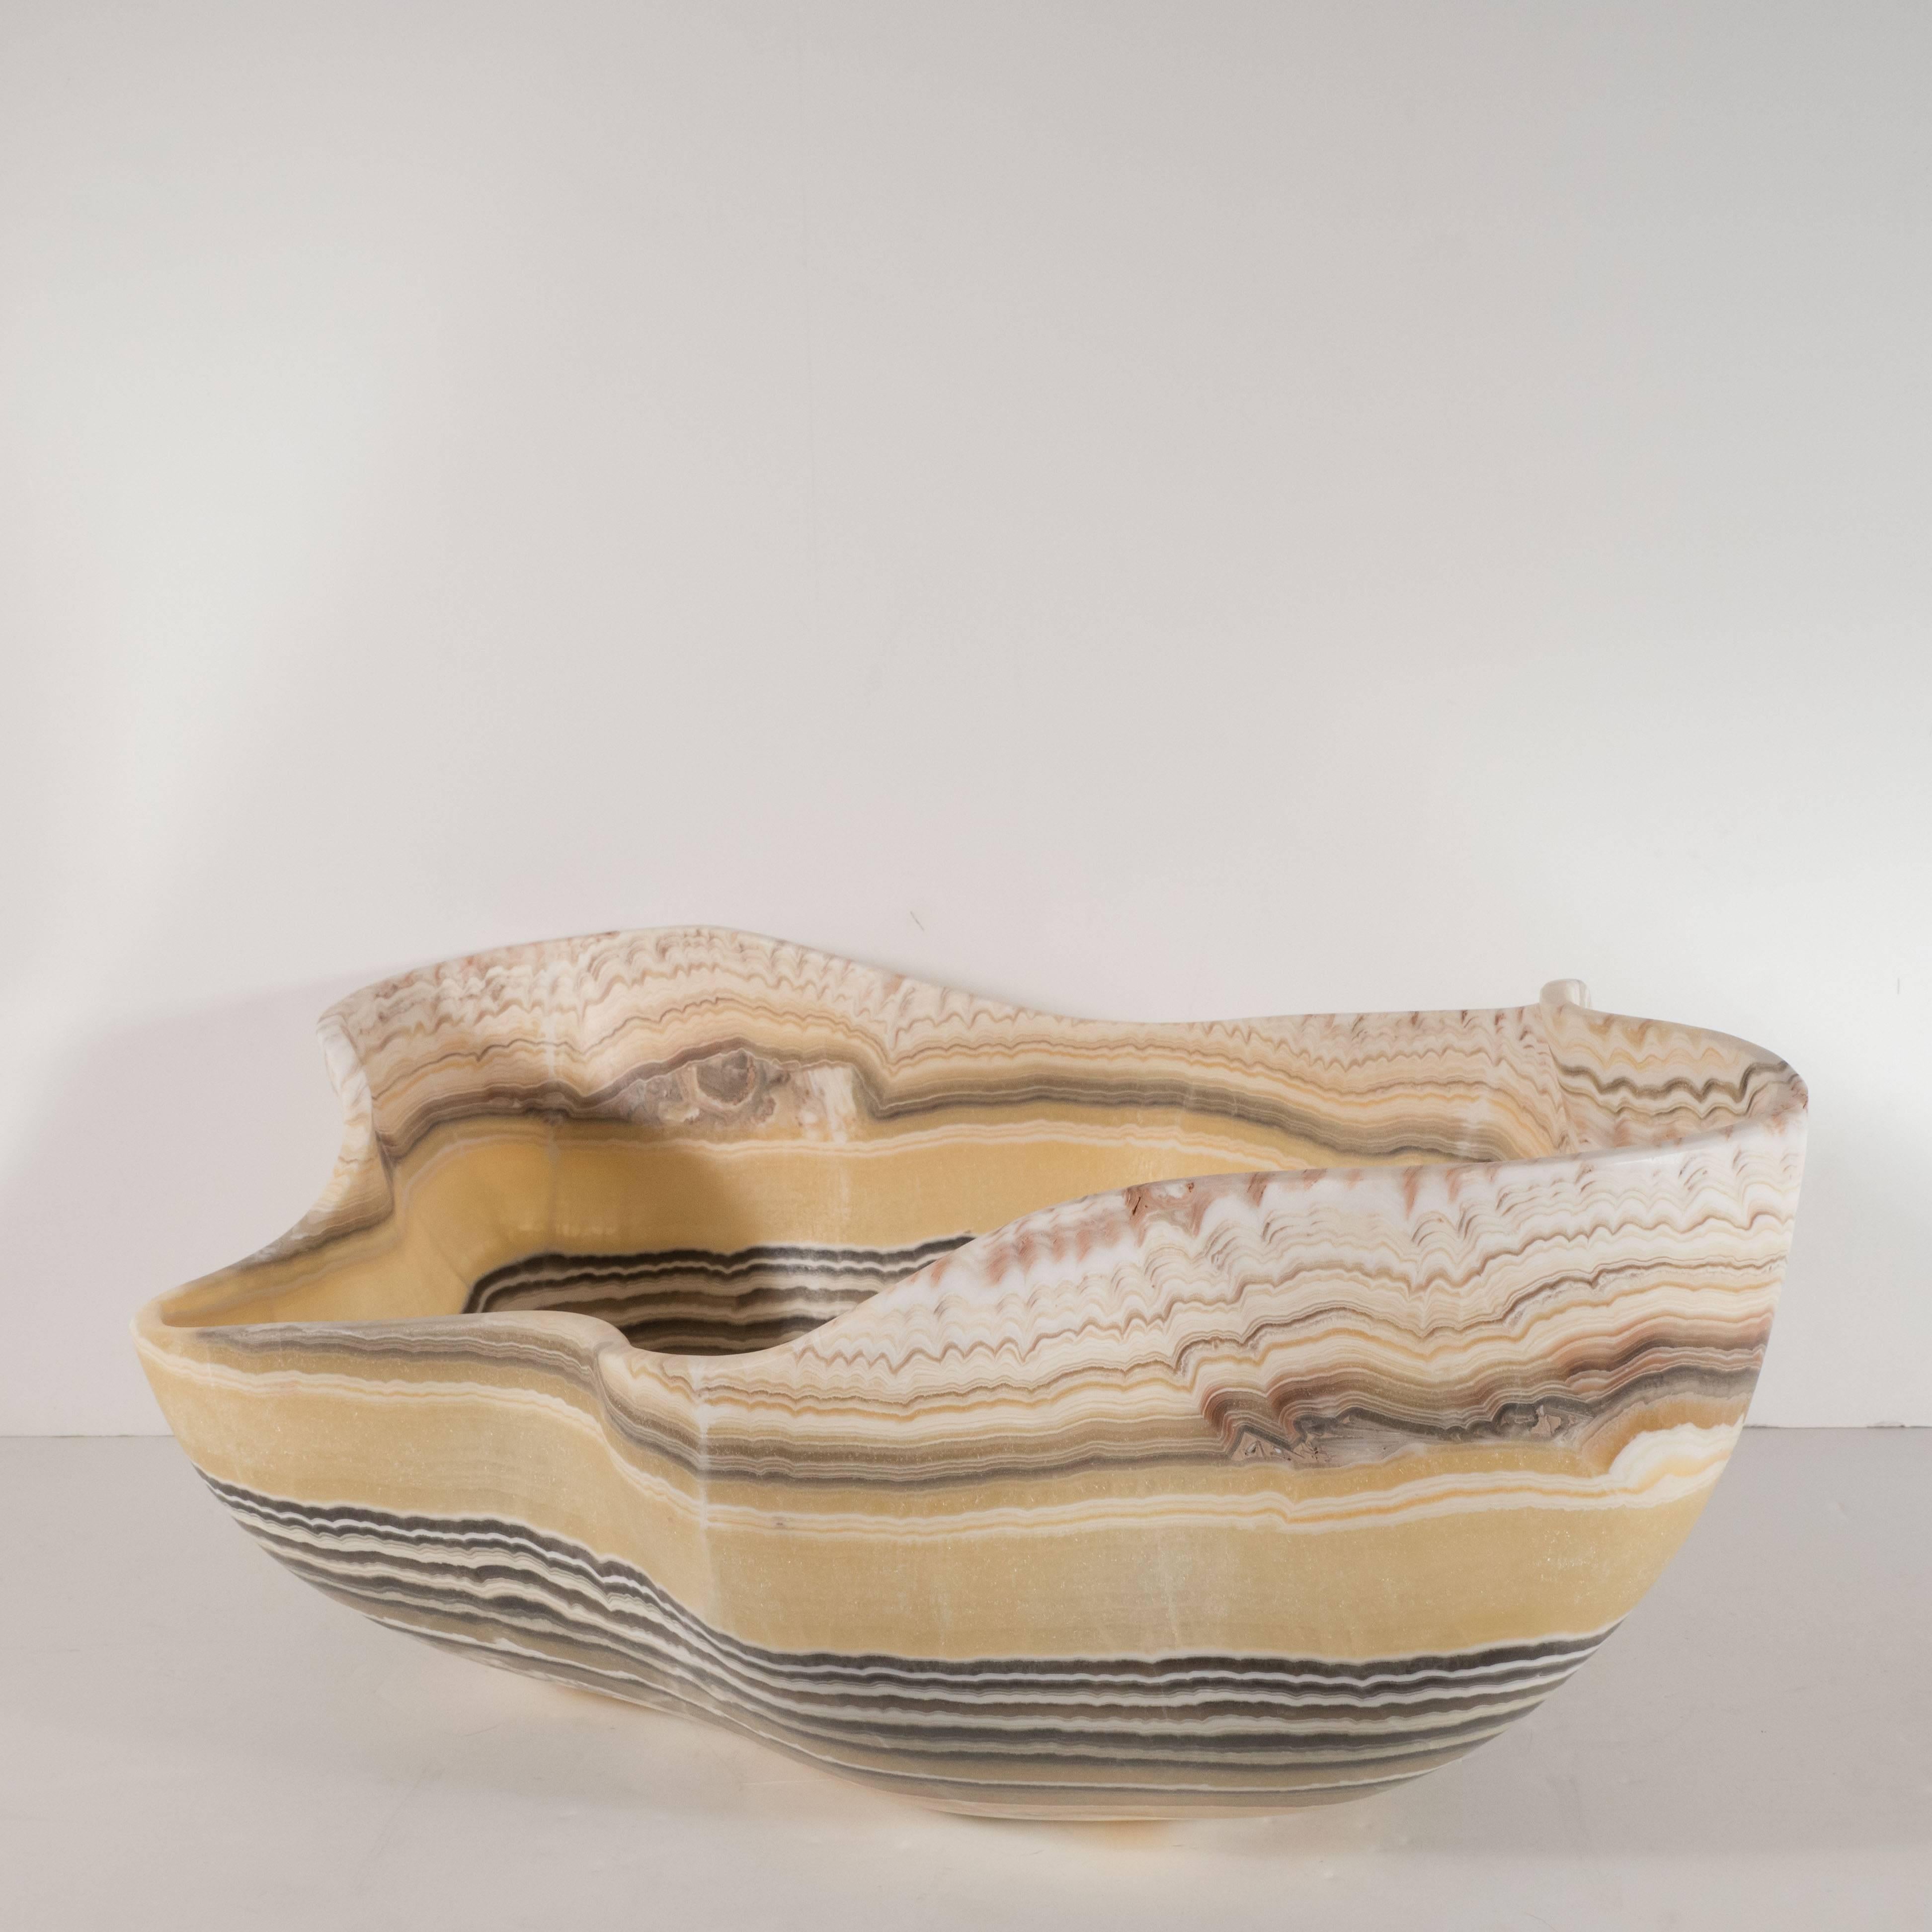 This compelling organic modern agate bowl features a wealth of texture in grisaille tones of charcoal, cream, and white set against a honey background, which adds a touch of warmth to the otherwise monochromatic palette. This piece showcases the